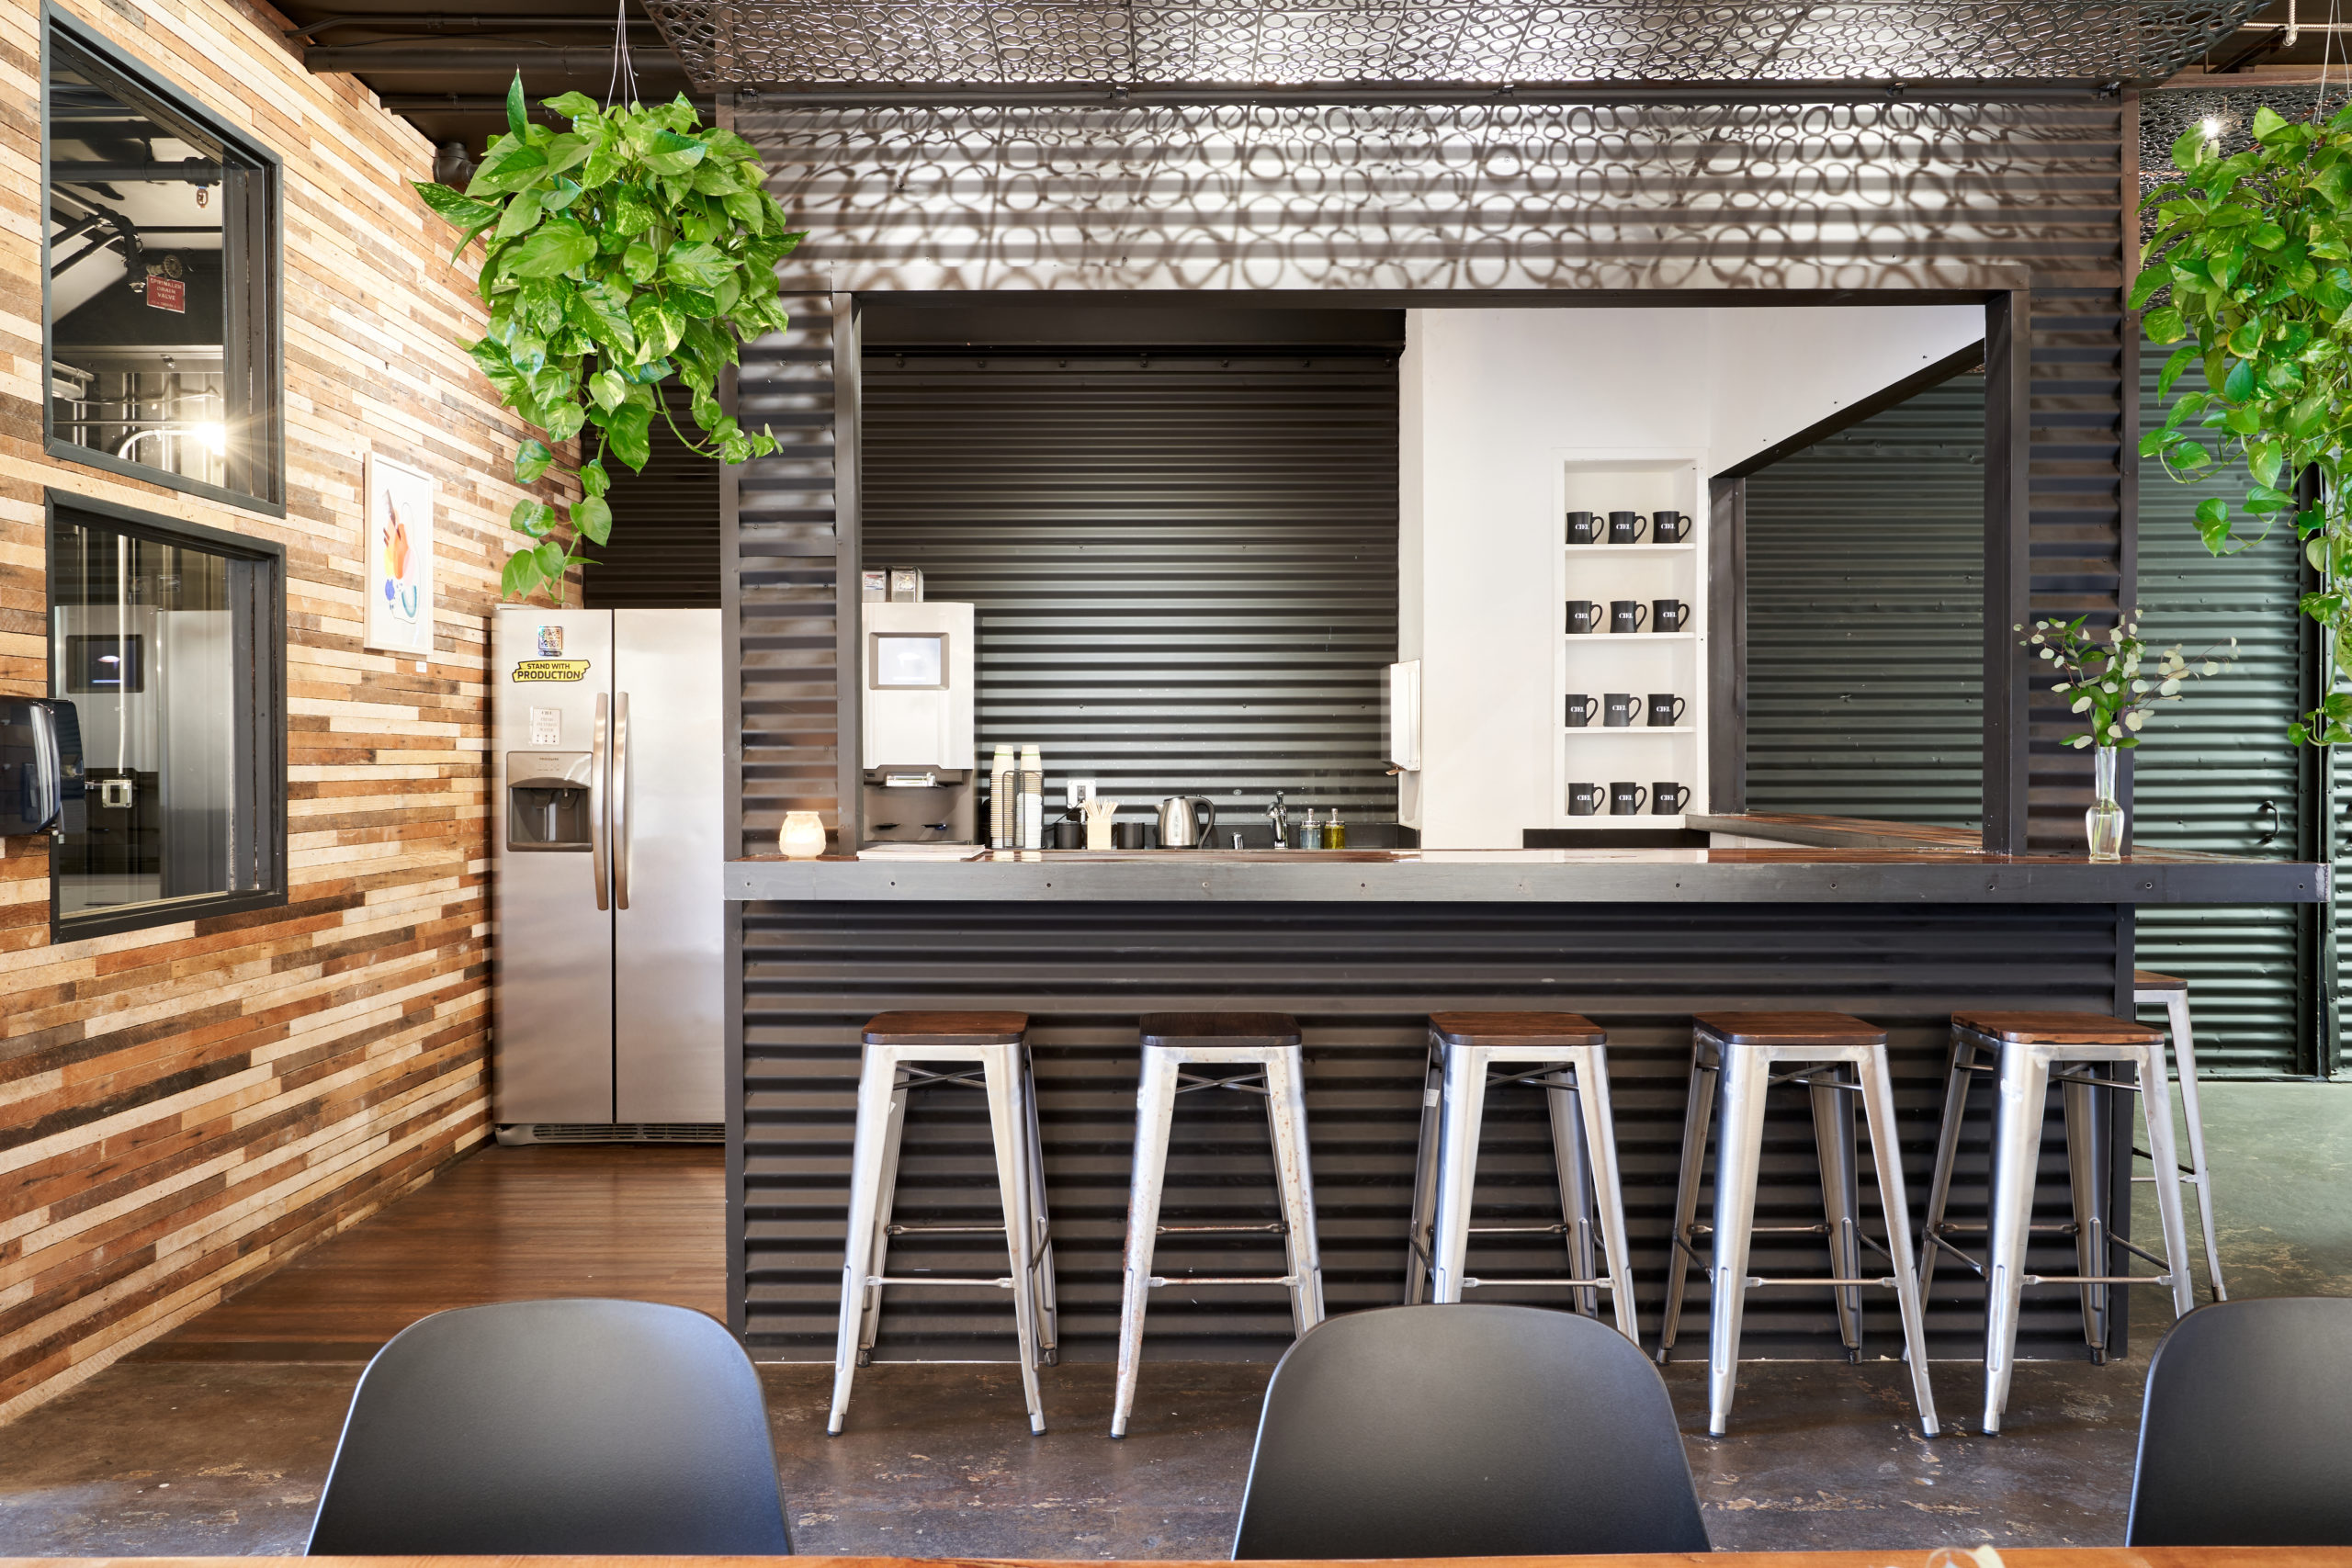 A close up view of the kitchen with a wide open window and five stools that sit at the bar, The kitchen contains a fridage and coffee maker and has black walls with green plants hanging on either side. A perfect addition to the best shared offices Berkeley has.